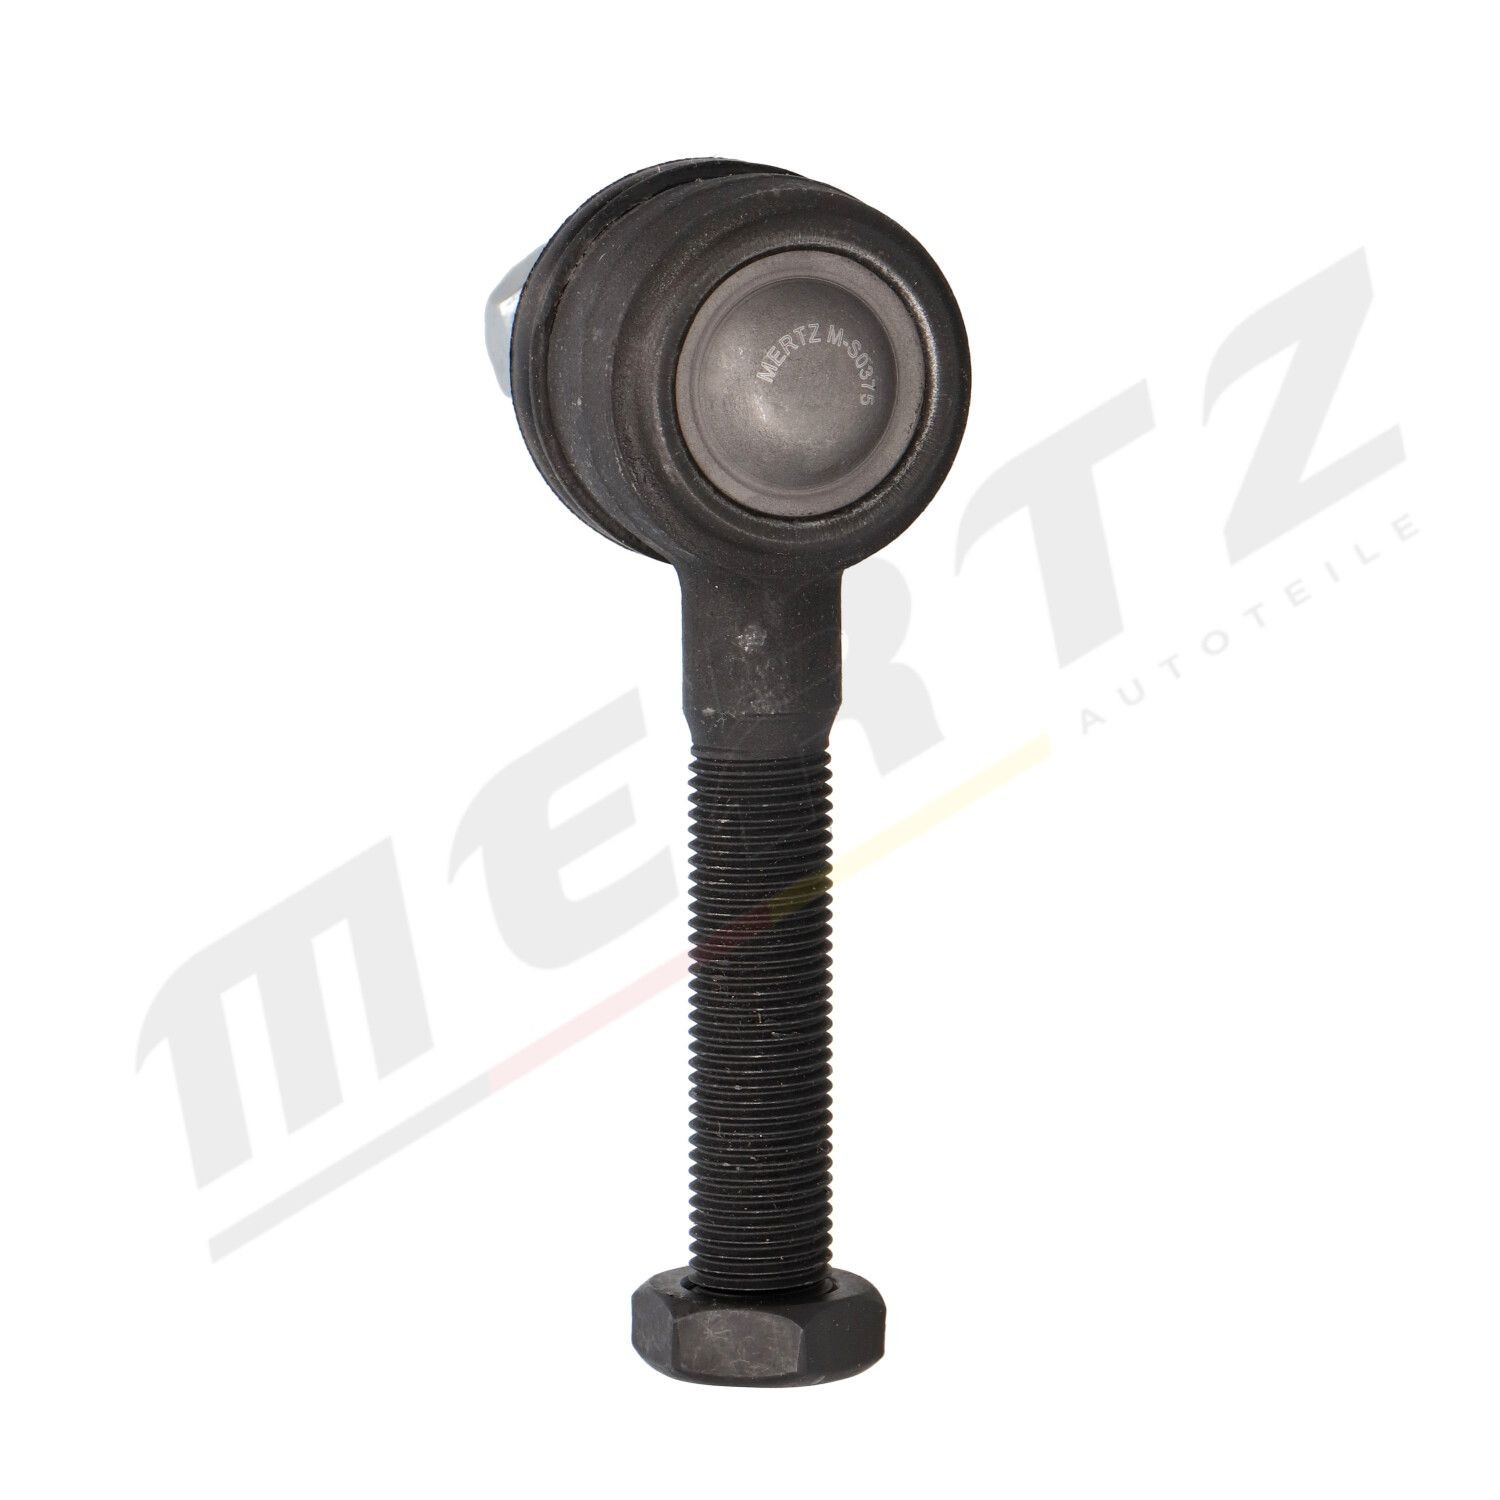 M-S0375 Tie rod end M-S0375 MERTZ M14x1,5, M10x1,25 mm, Front Axle Left, Front Axle Right, with self-locking nut